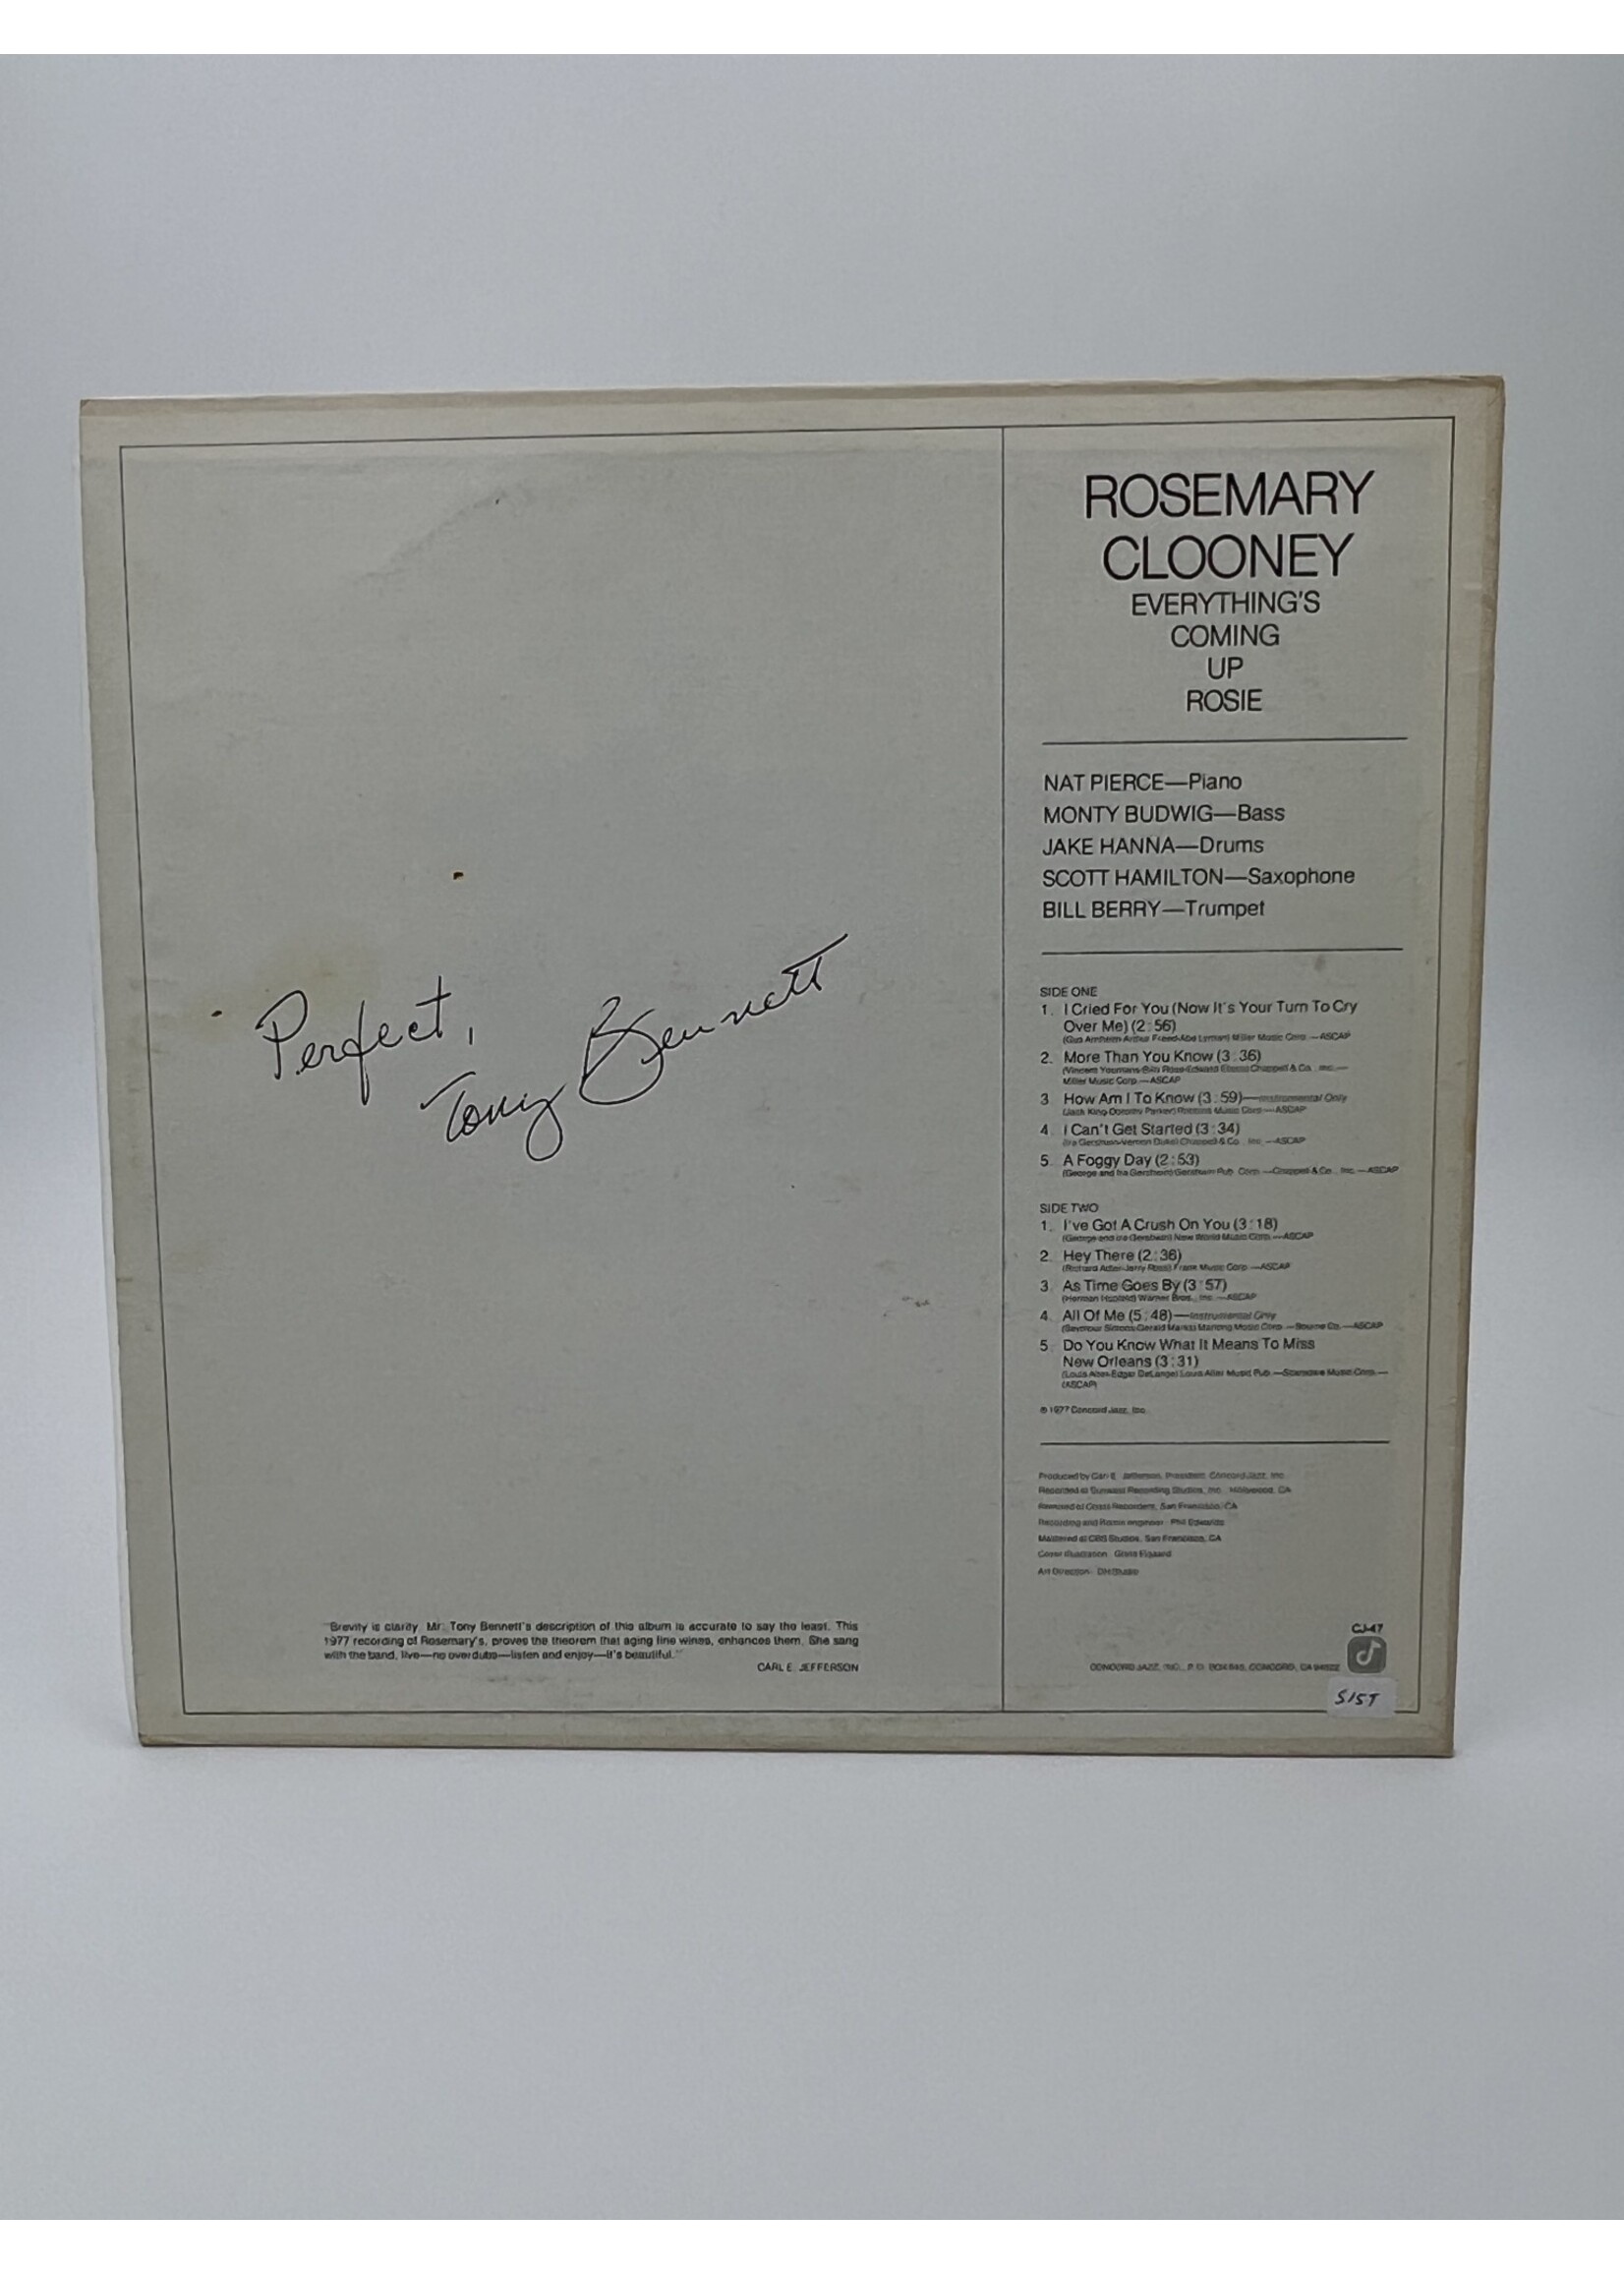 LP   Rosemary Clooney Everything Coming Up Rosie LP Record